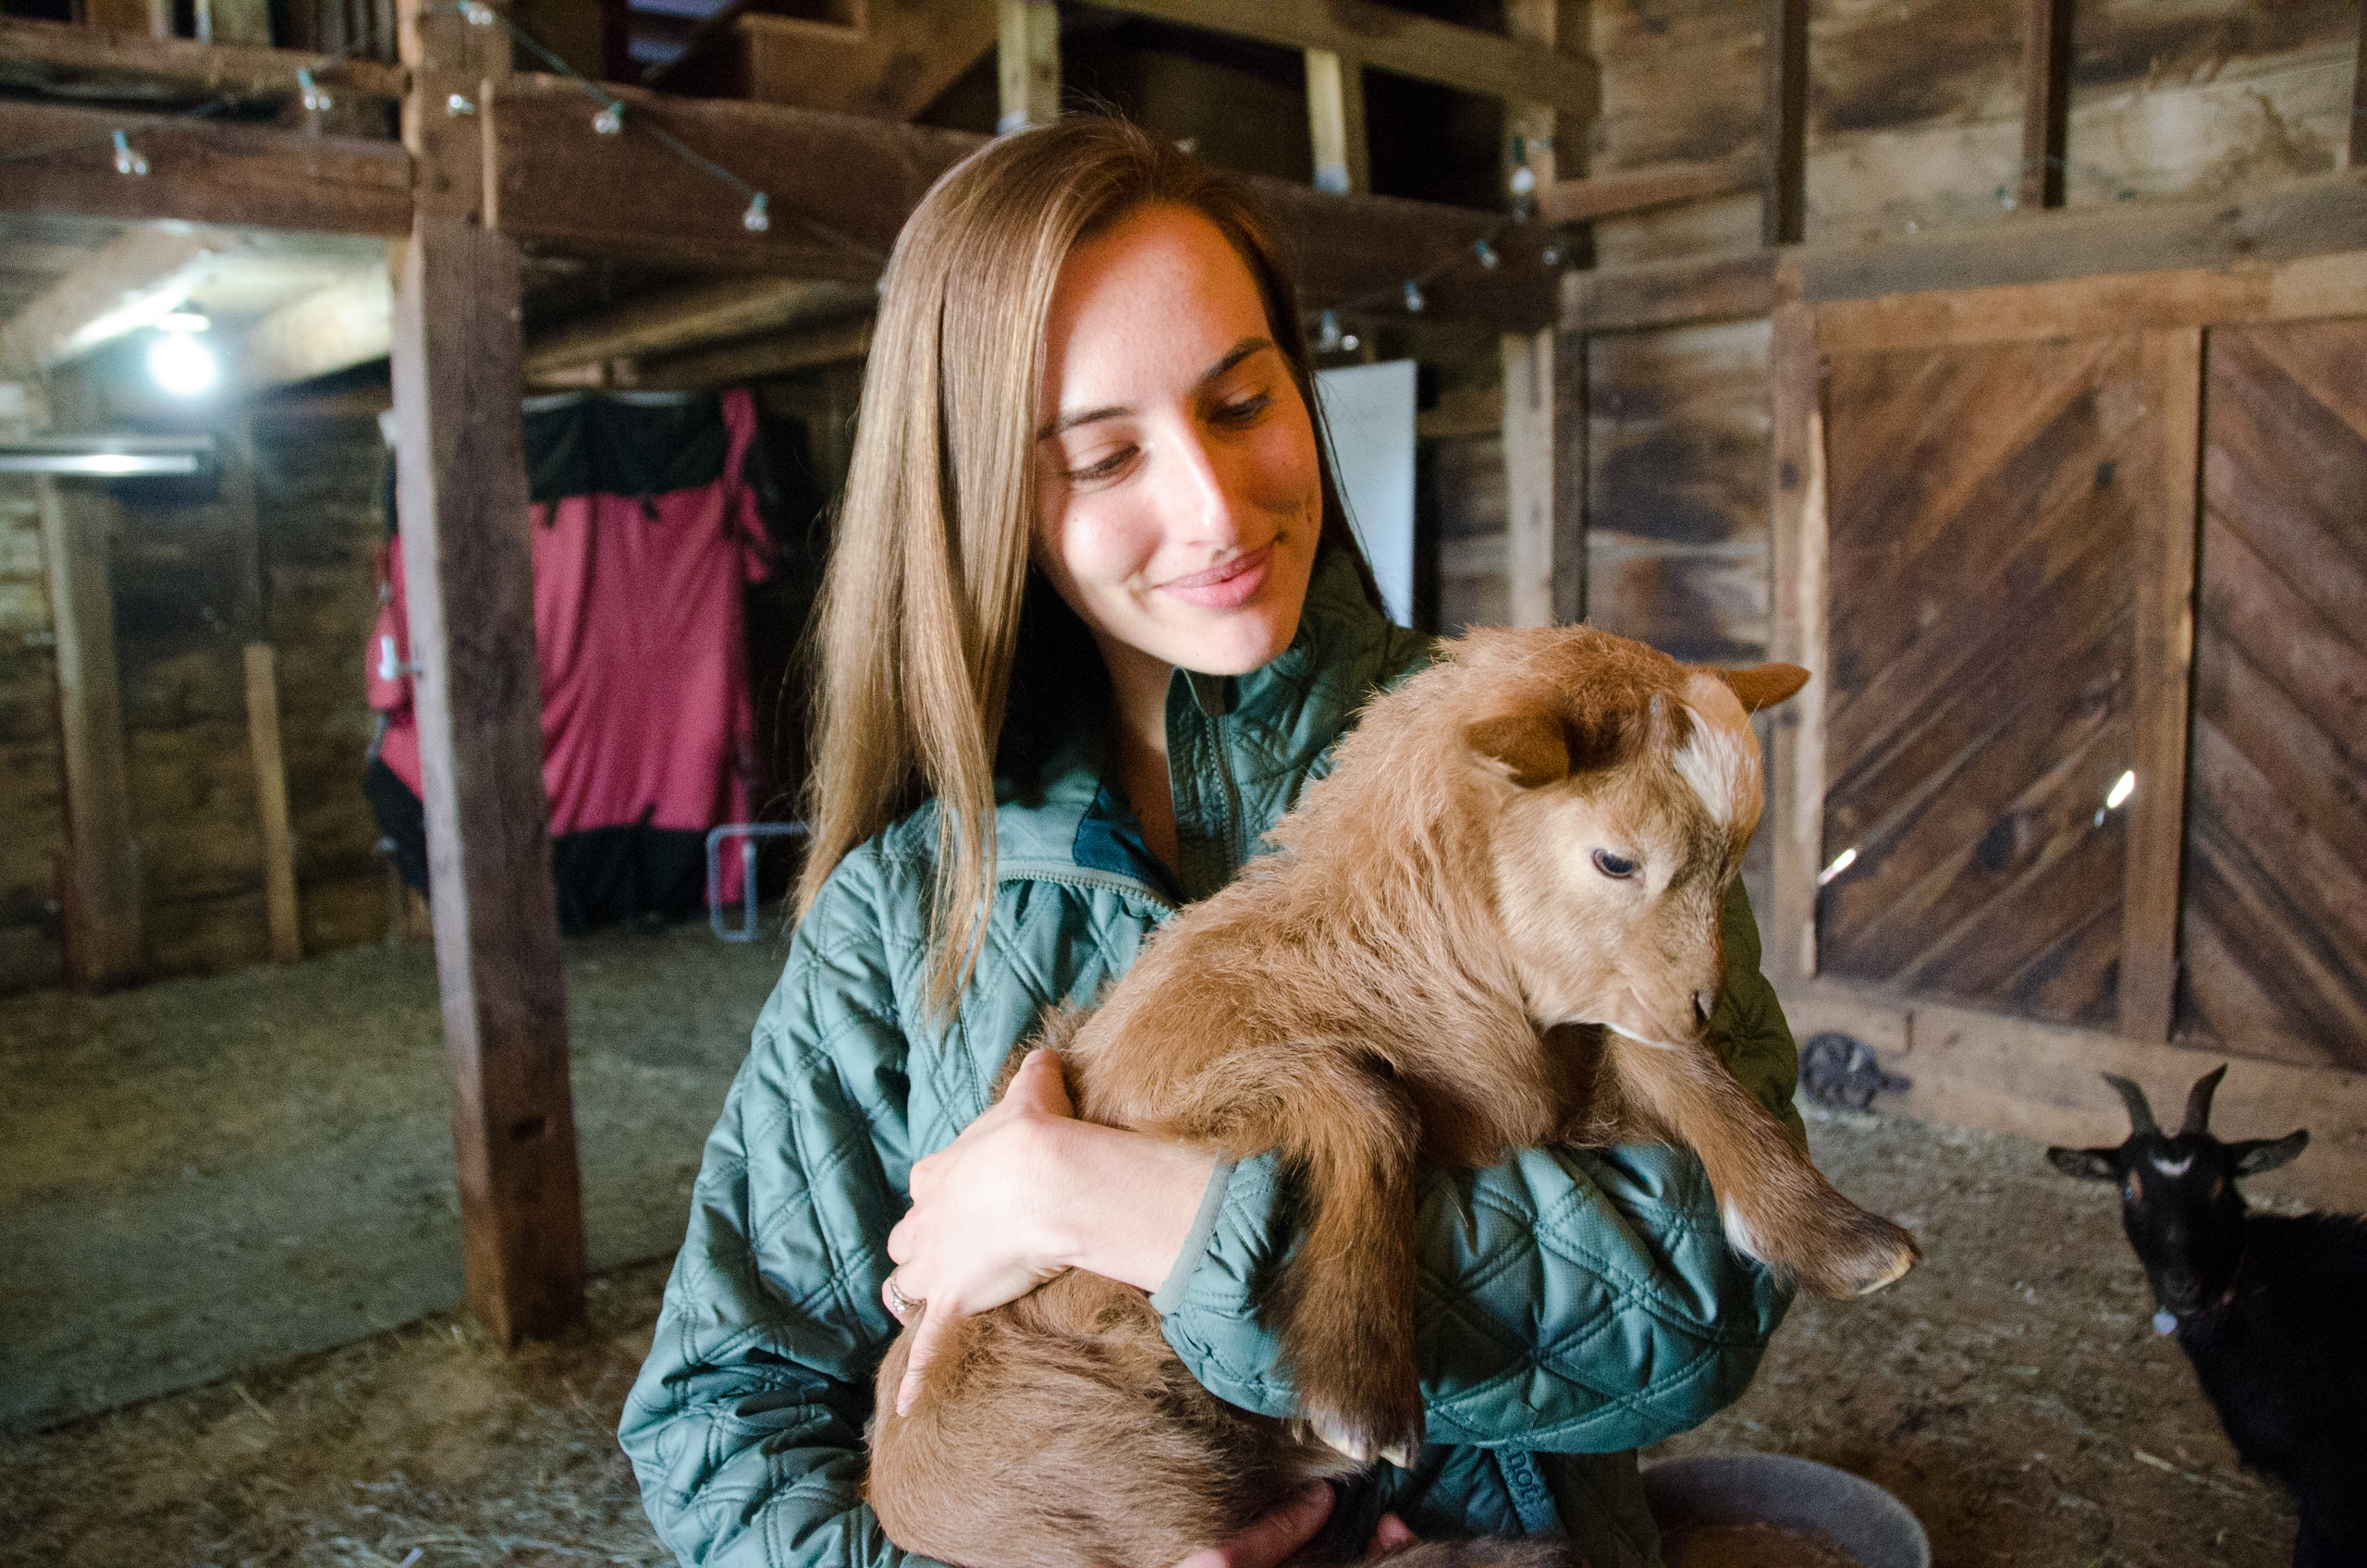 Samantha Sundermeyer with a baby goat at Cultivate Care Farm